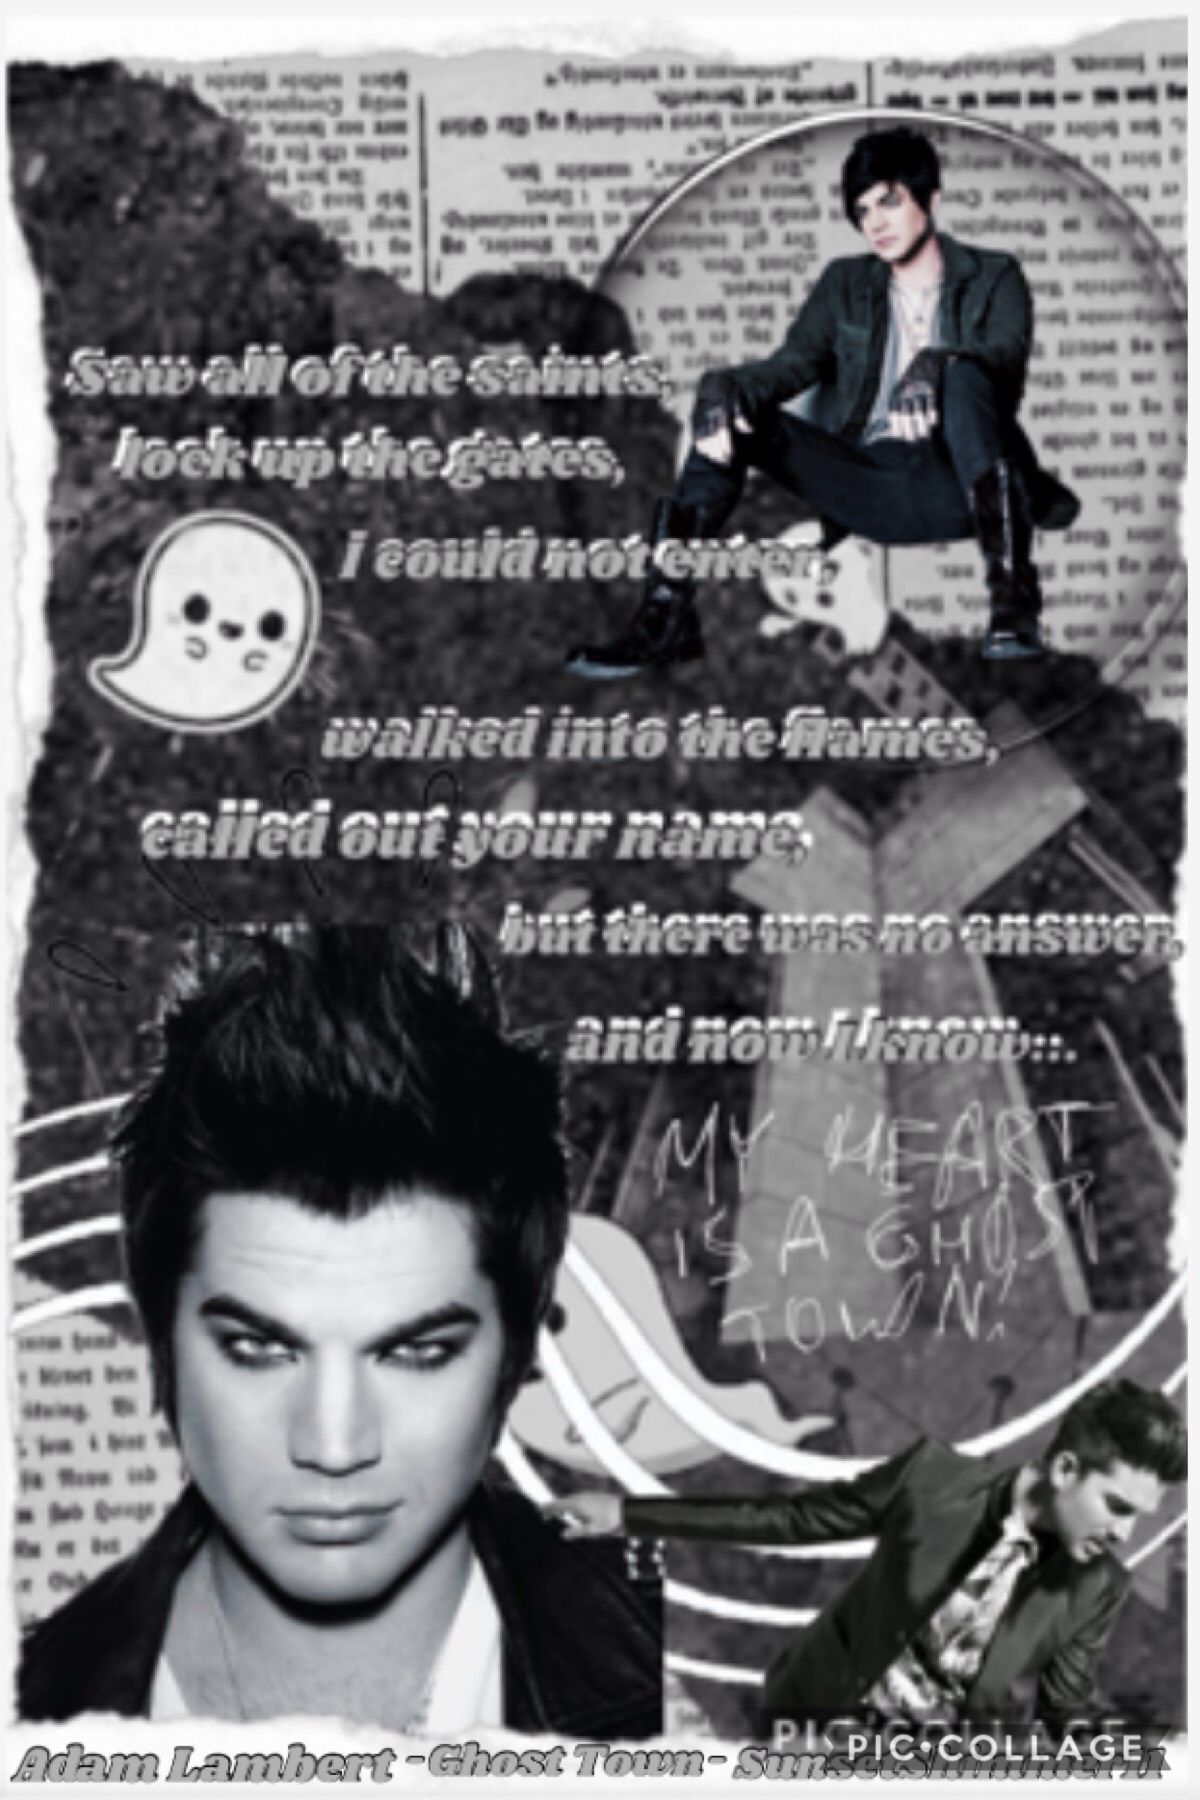 👻TAP👻
20-4-22
Collage for Kittycat2008's contest-make a collage using lyrics from a song
👻Adam Lambert👻
Ghost Town